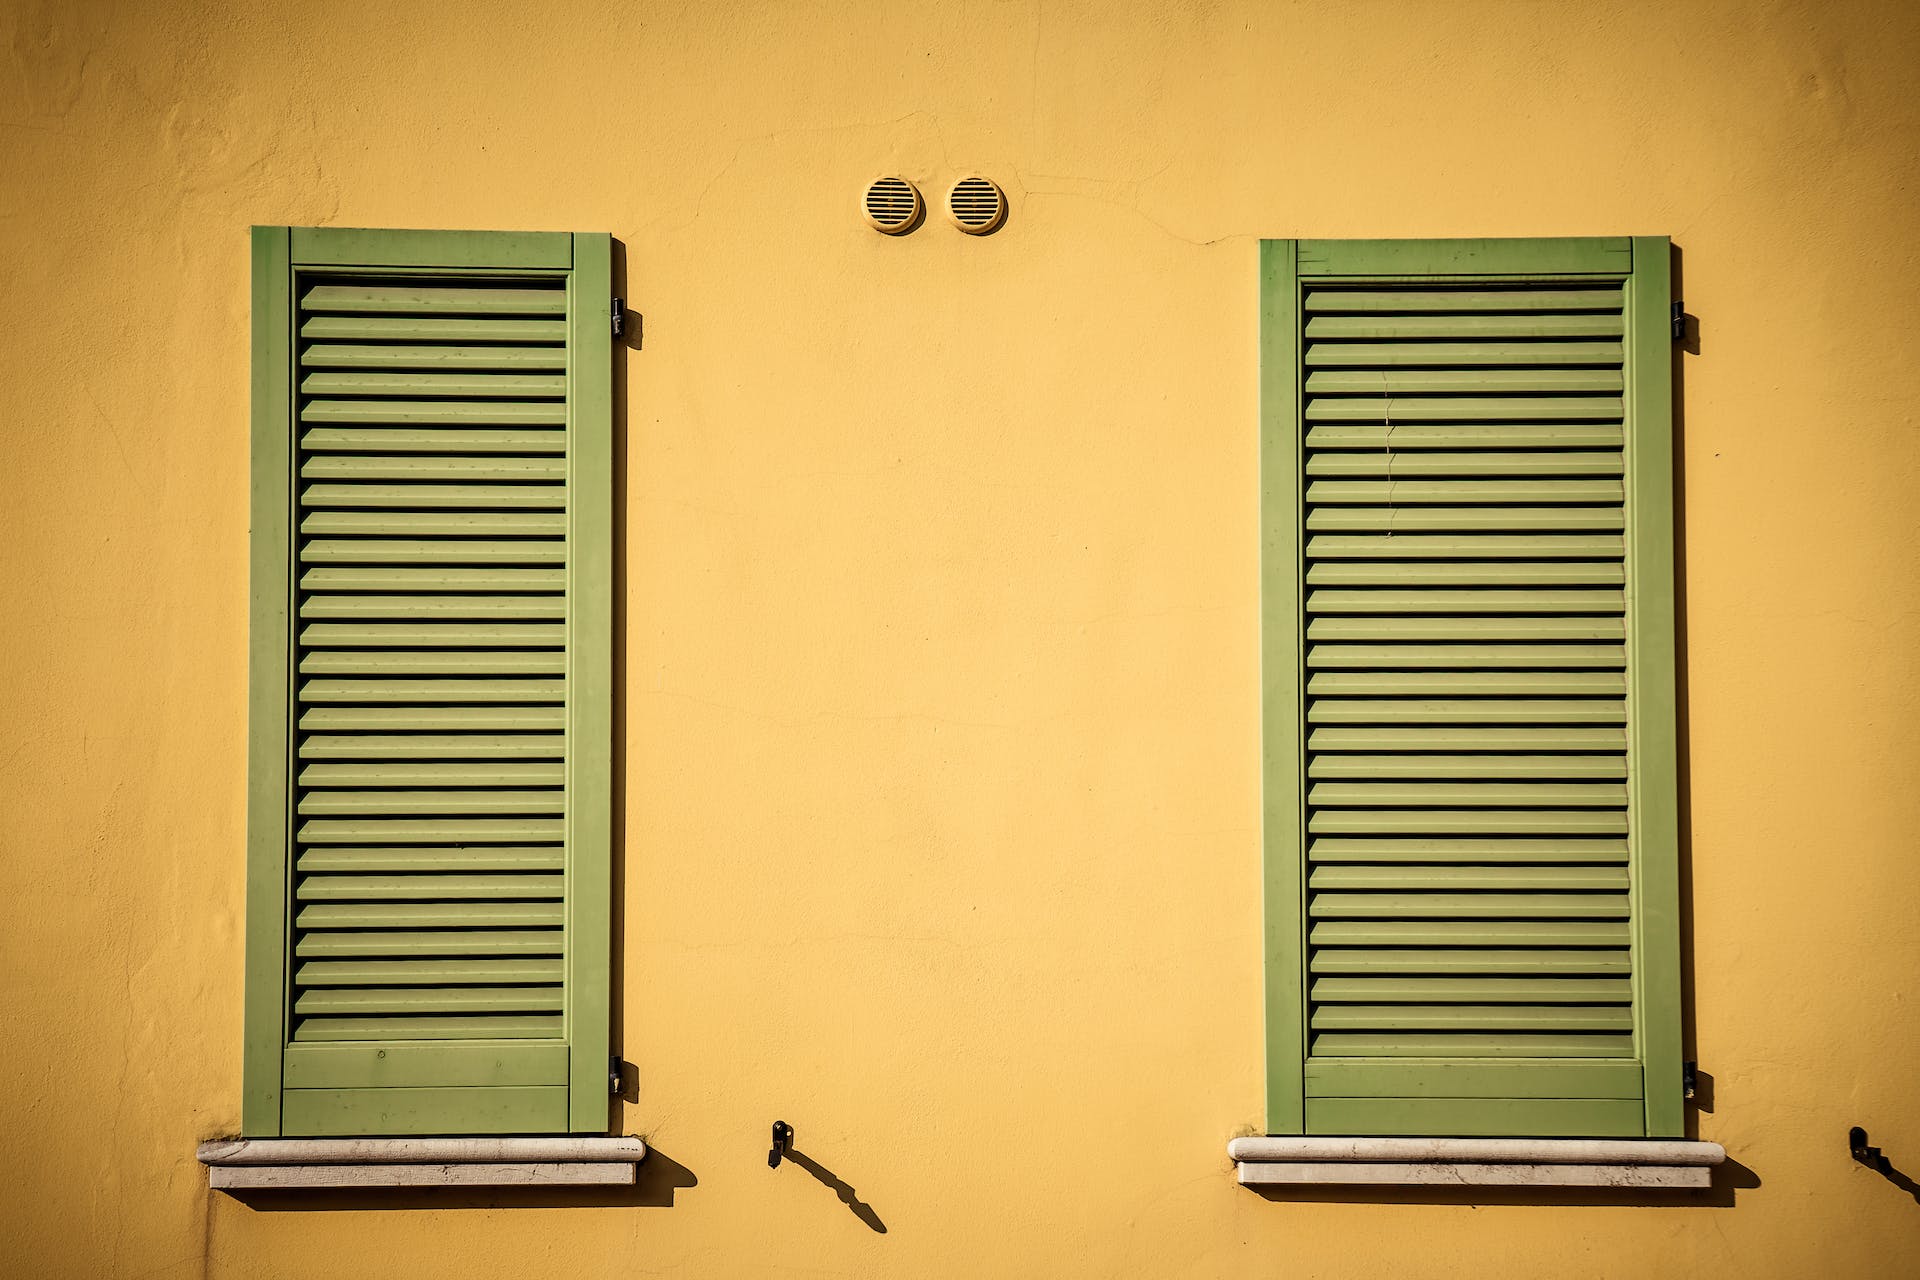 A pair shutters for windows from the outside closed over the window opening